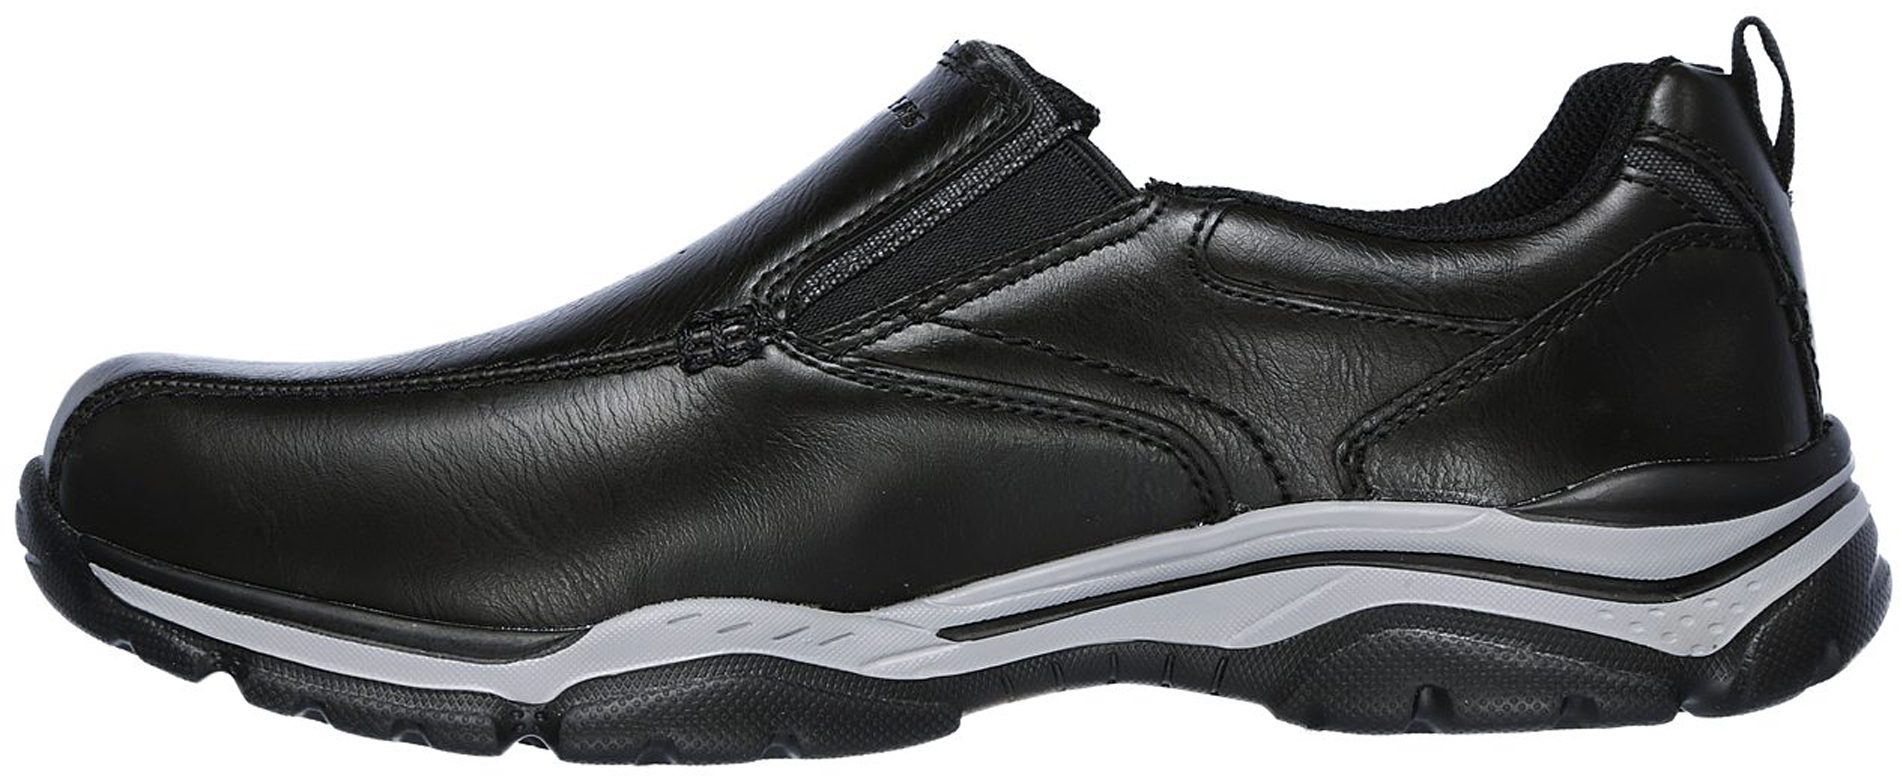 Skechers Relaxed Fit: Rovato - Venten Black 65415 BLK - Casual Shoes ...